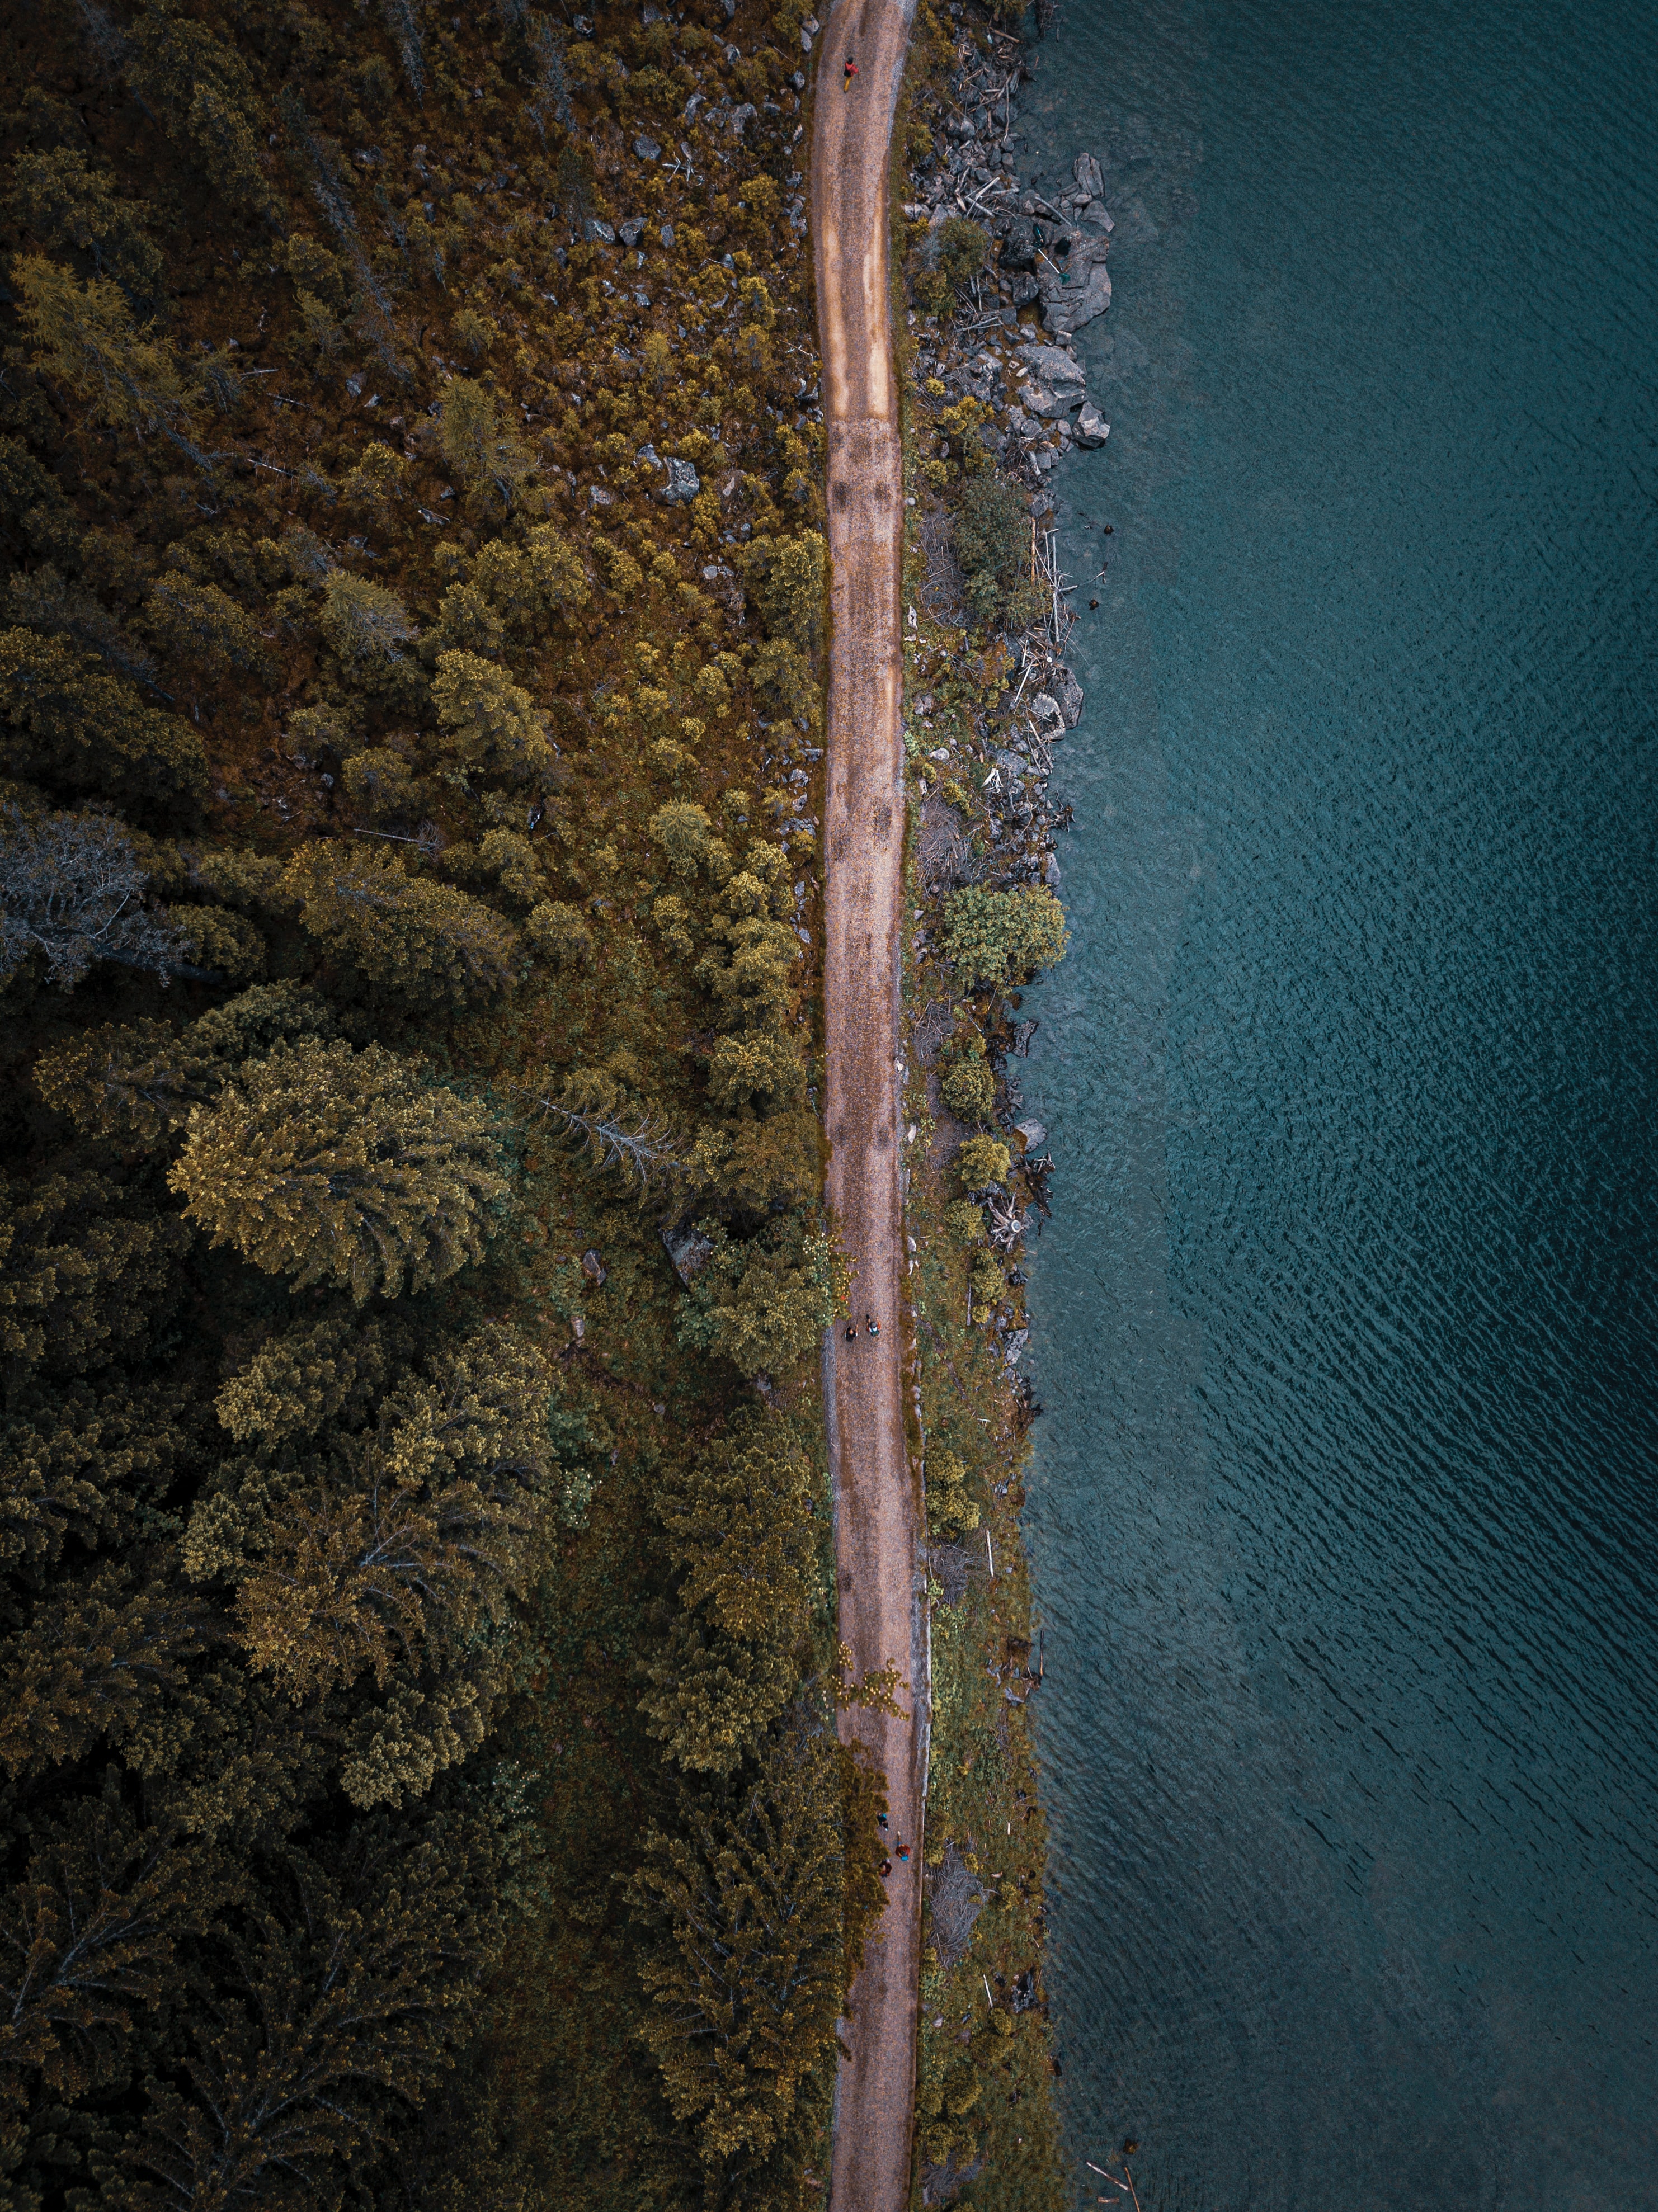 android view from above, nature, trees, sea, road, forest